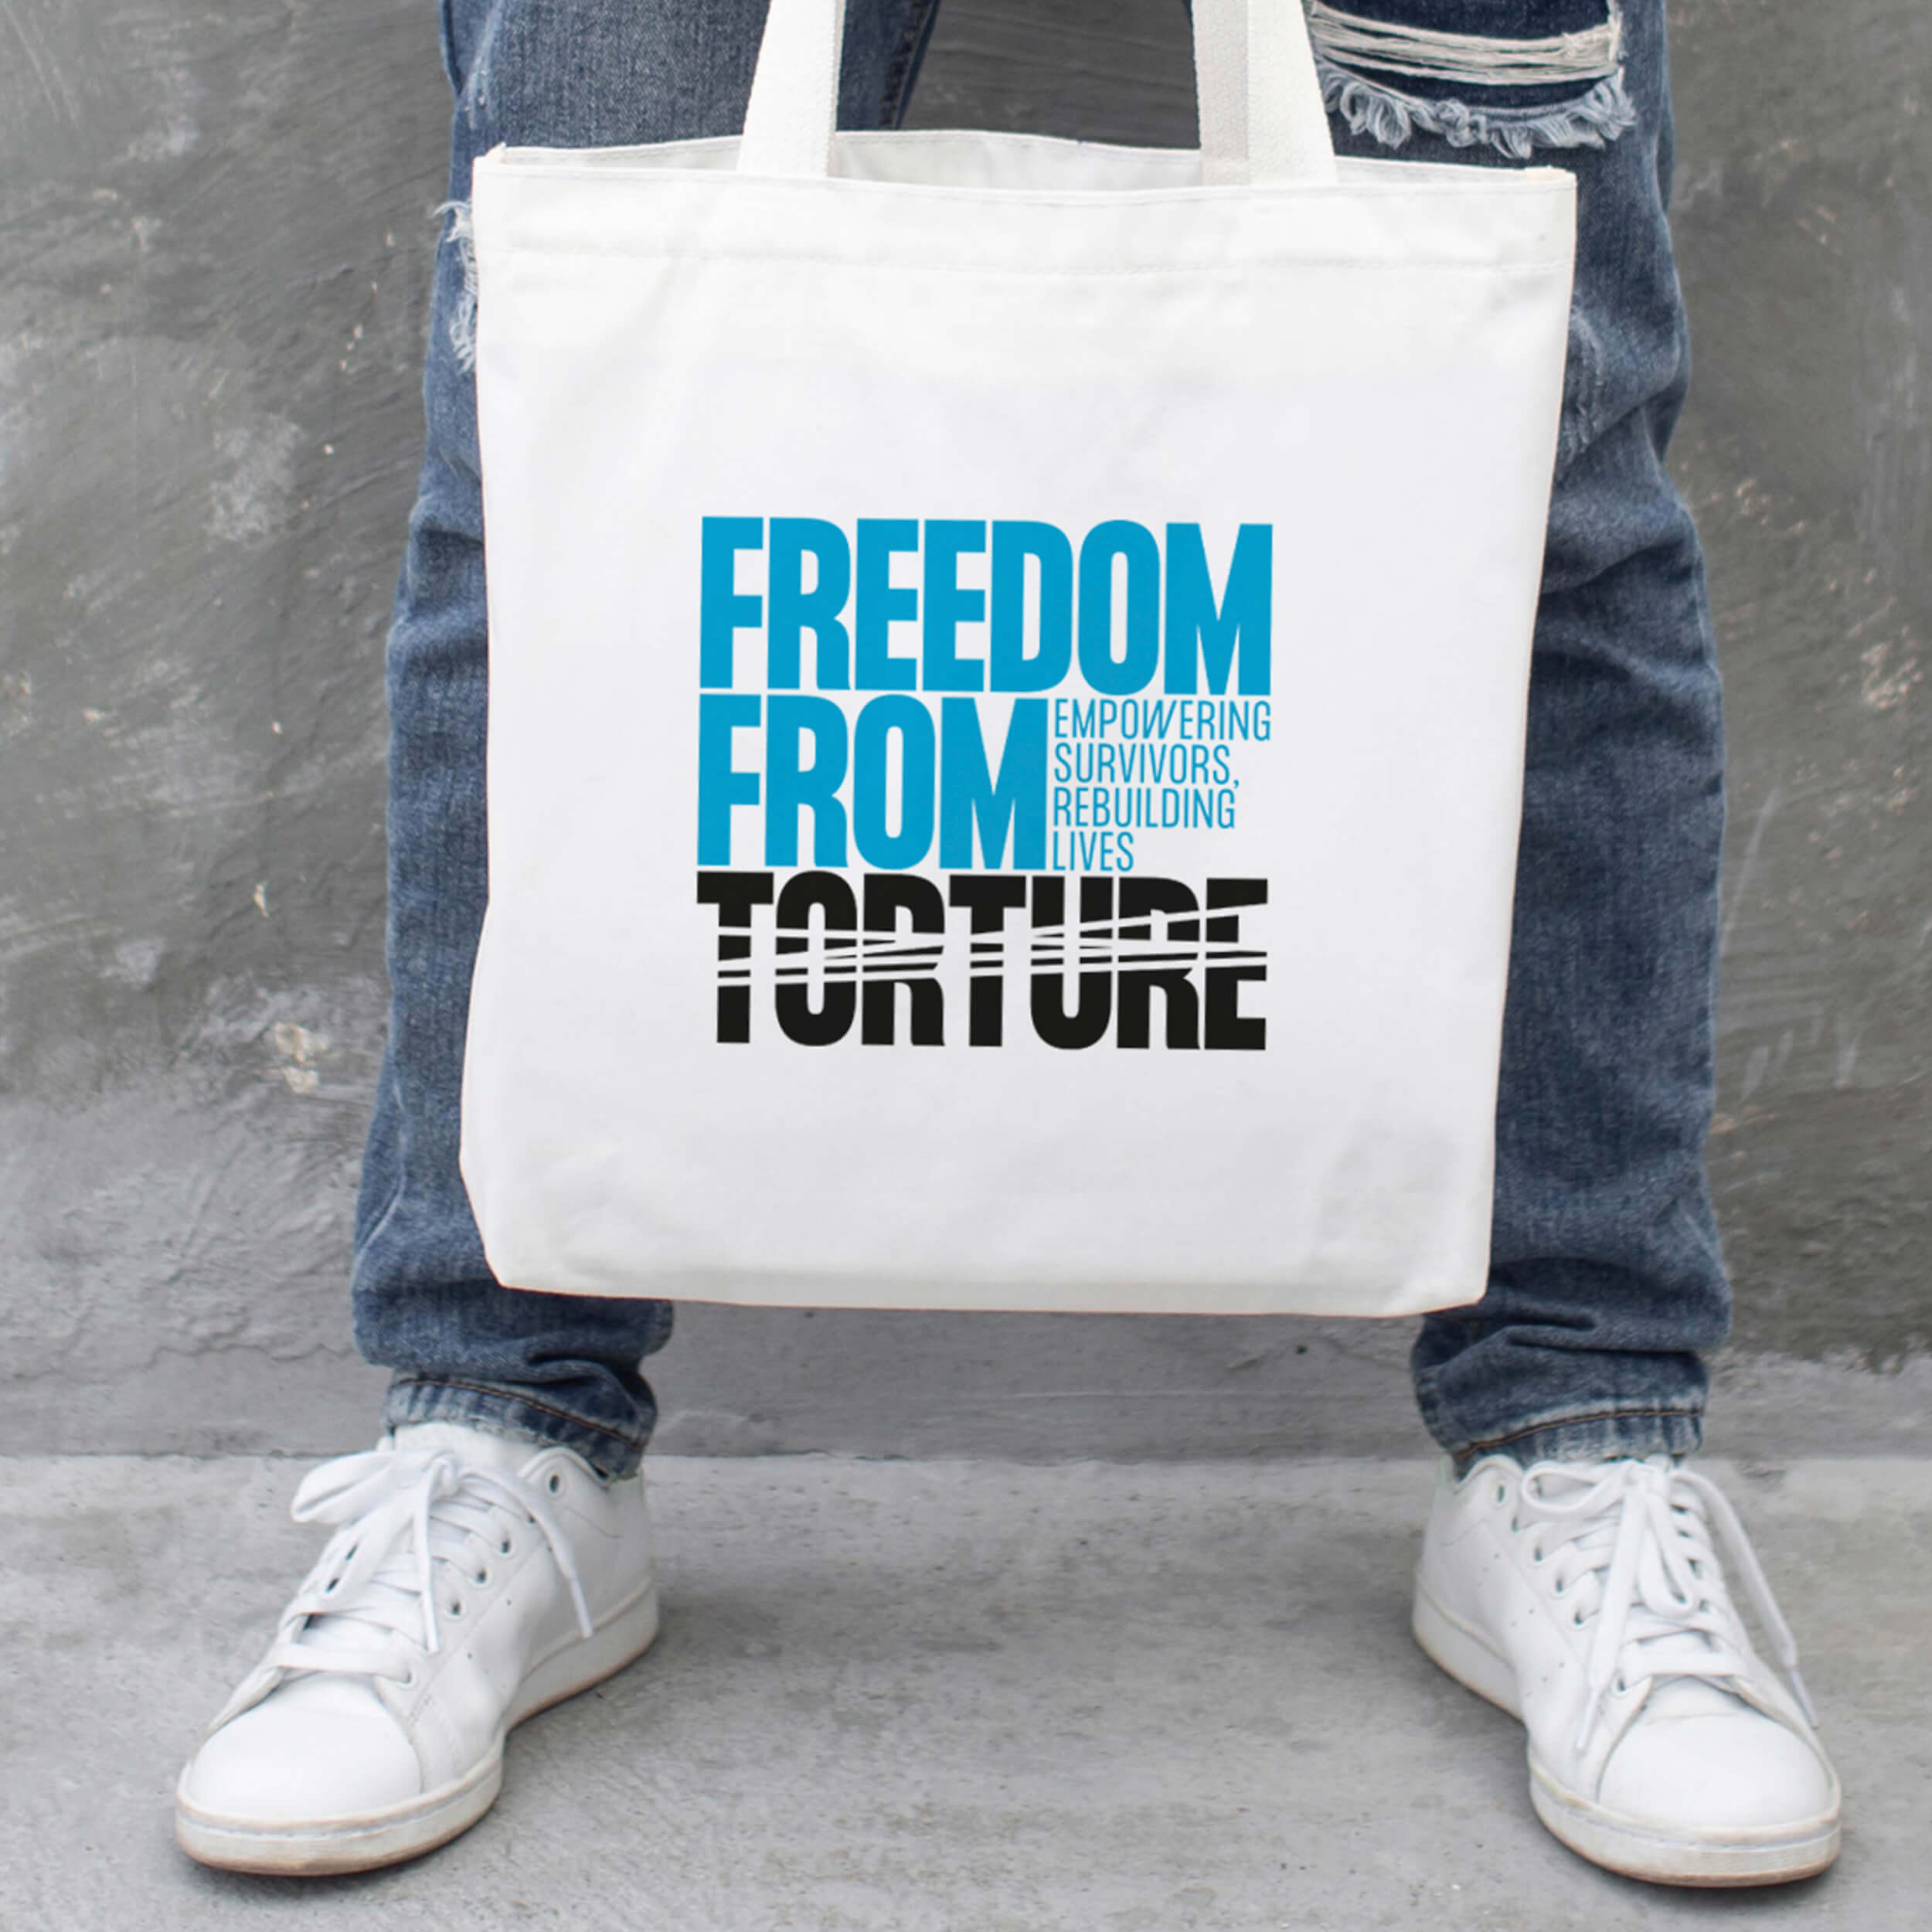 Freedom From Torture branded tote bag